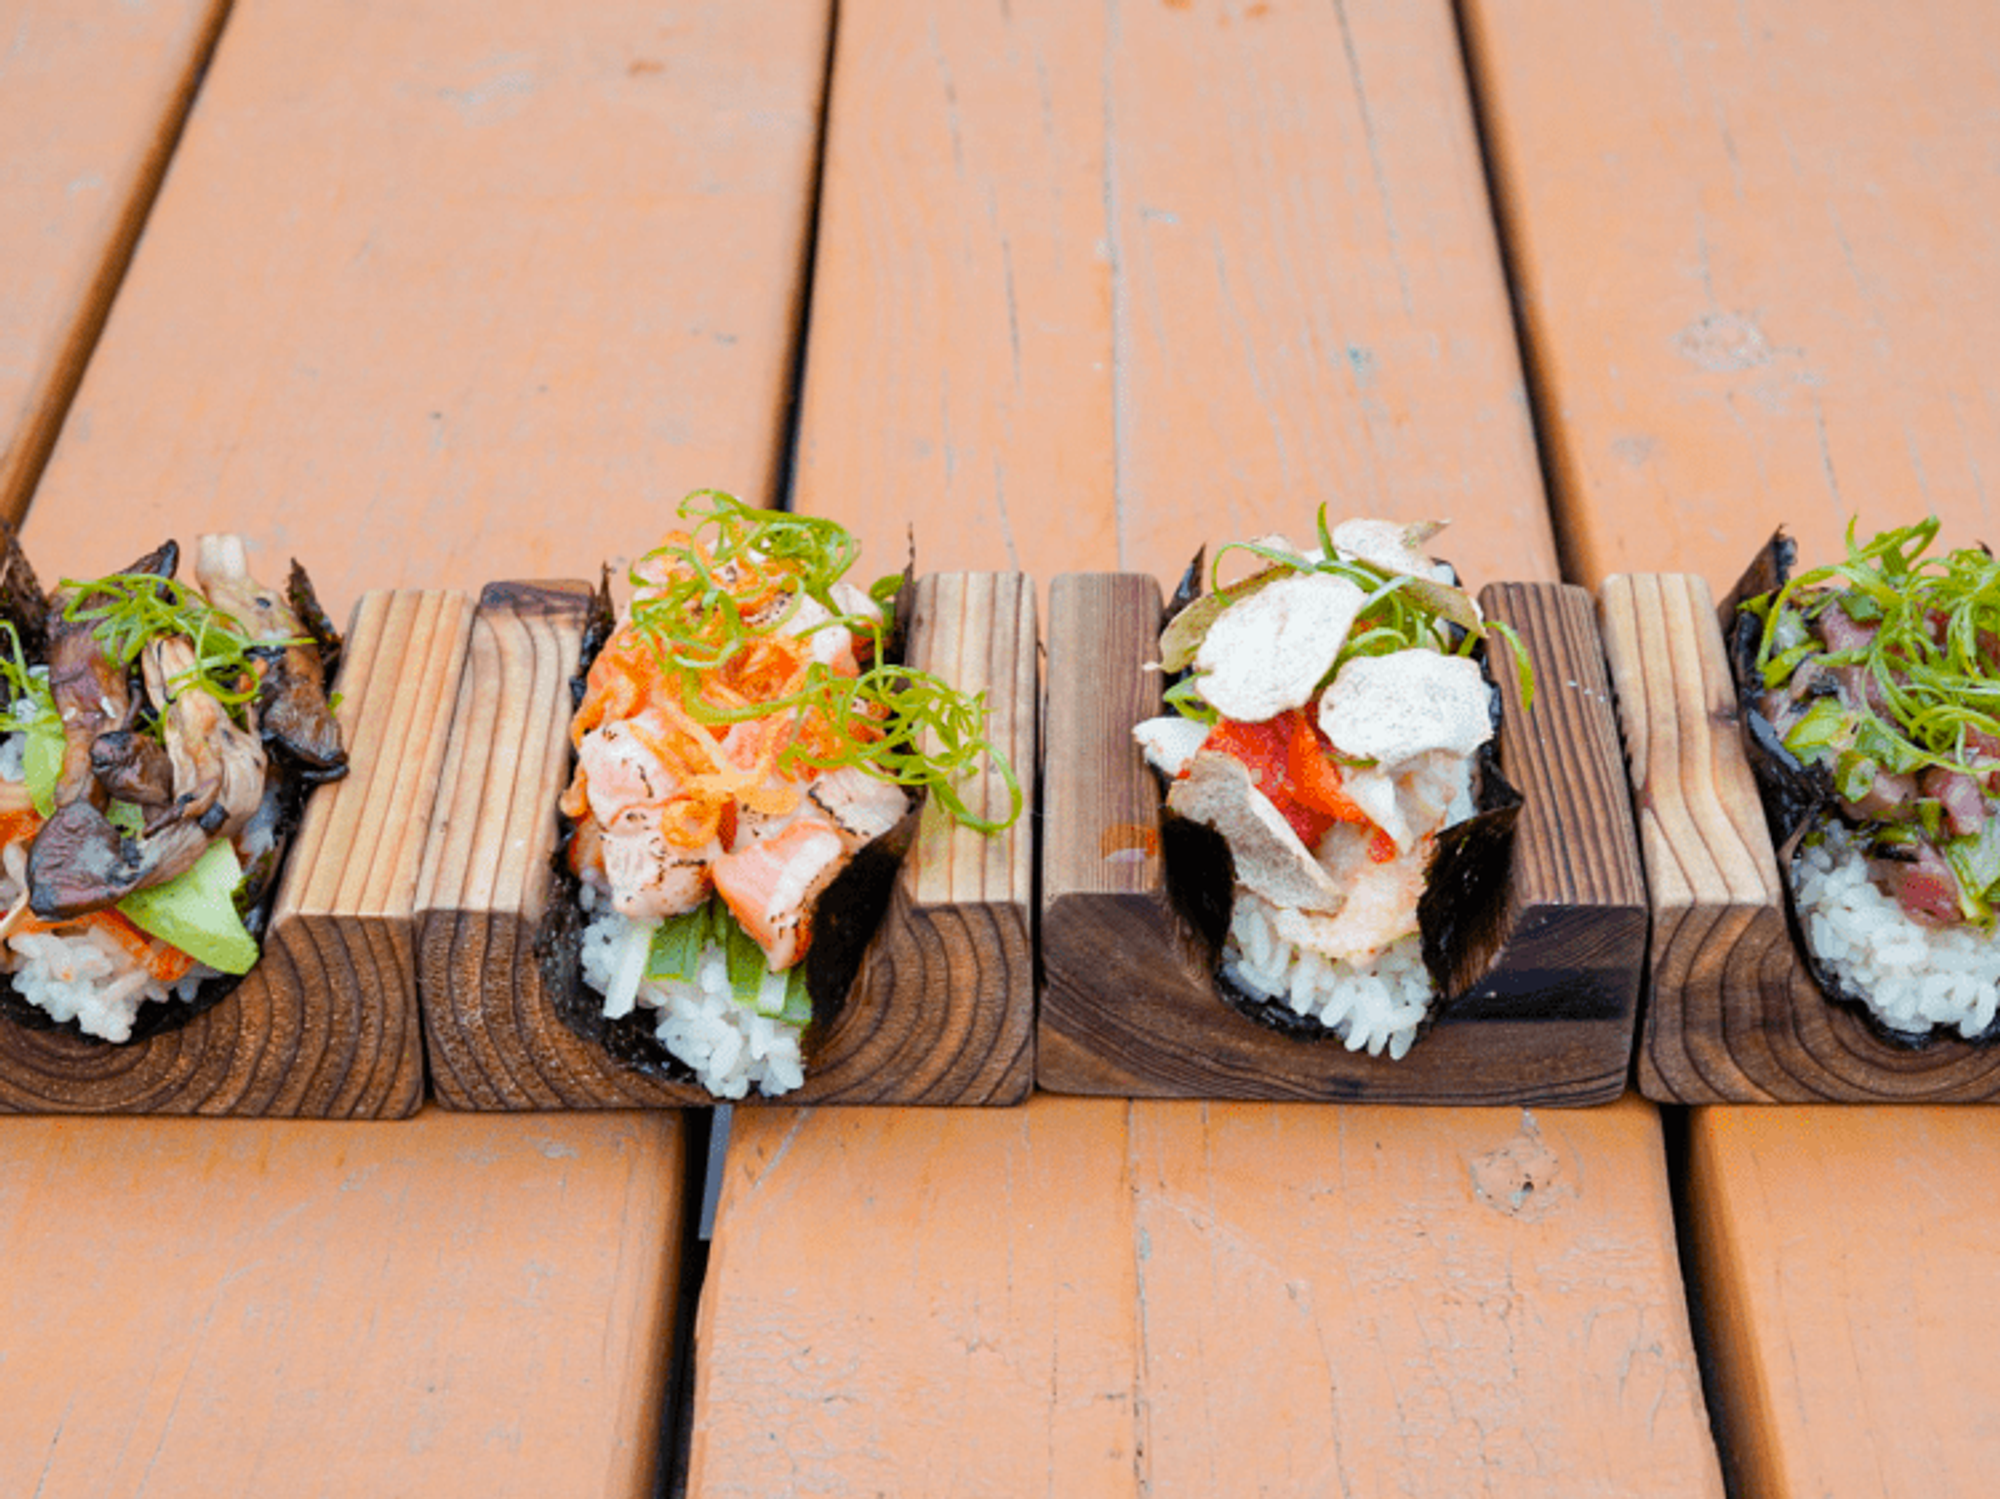 From salmon to king crab, pork belly, and oyster mushrooms, there's a hand roll for every taste.